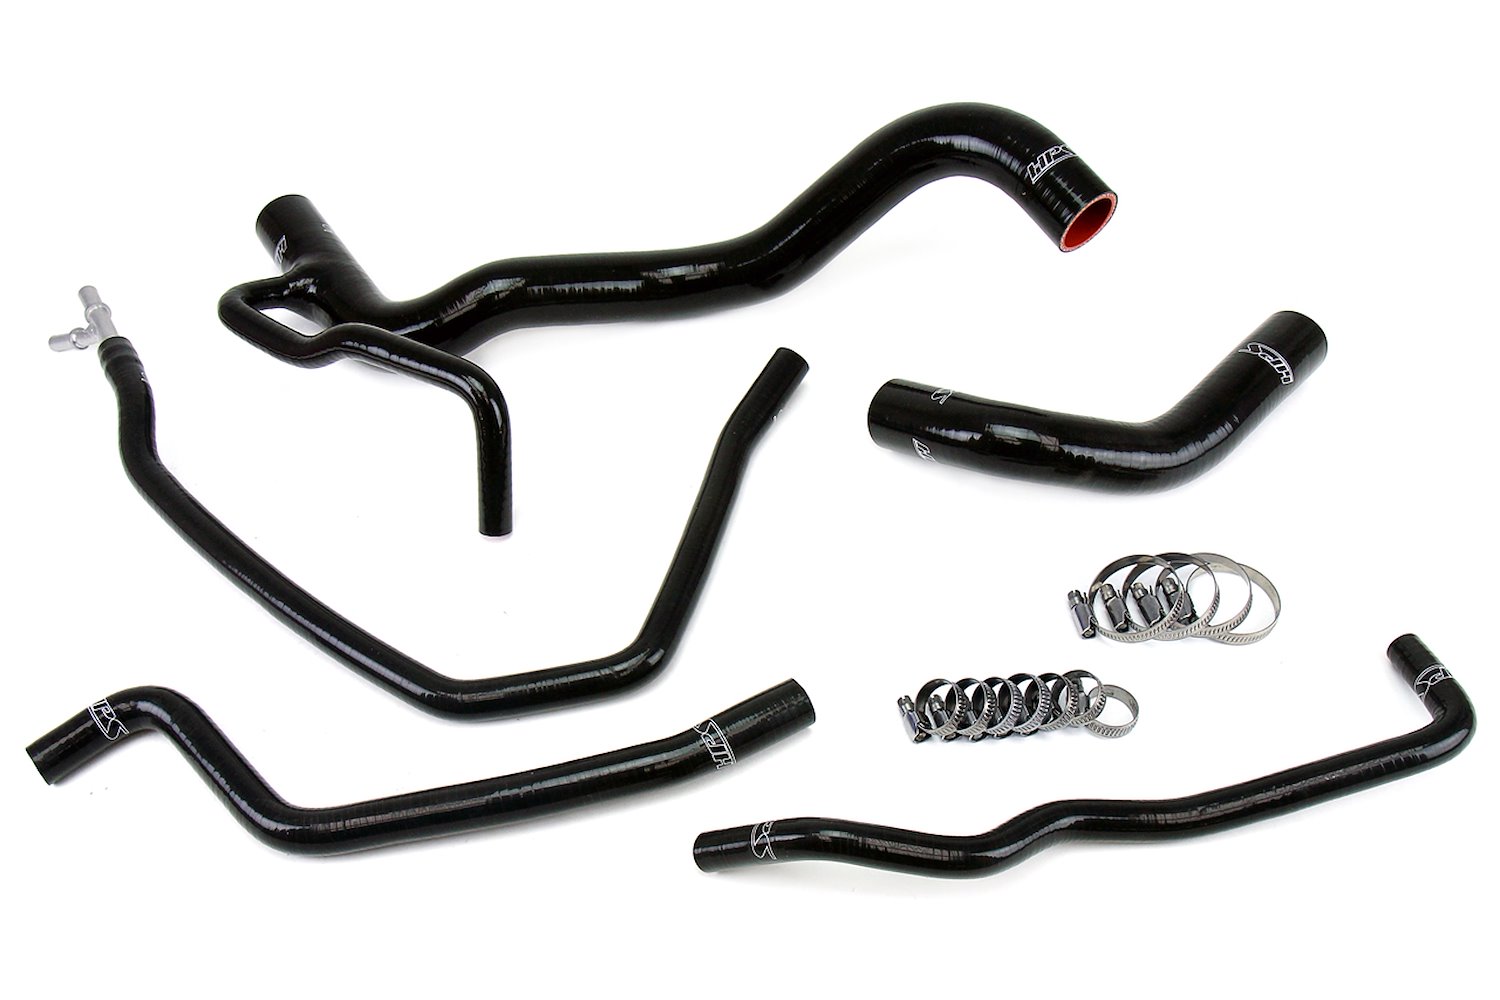 57-1479-BLK Radiator Hose Kit, High-Temp 3-Ply Reinforced Silicone, Replace OEM Rubber Radiator Coolant Hoses